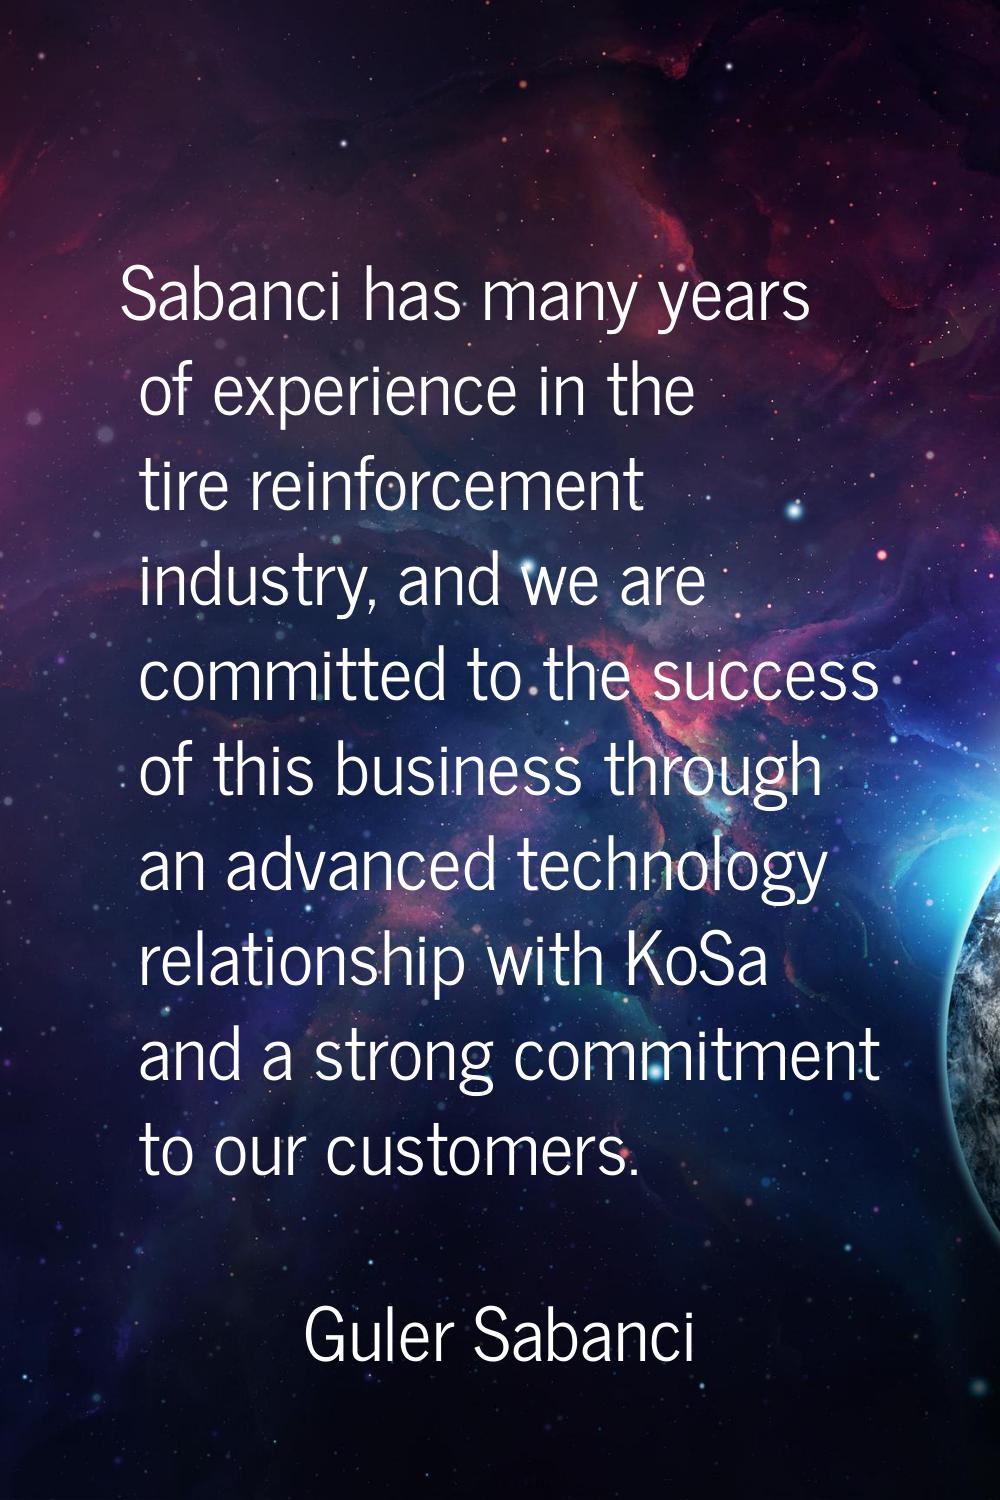 Sabanci has many years of experience in the tire reinforcement industry, and we are committed to th